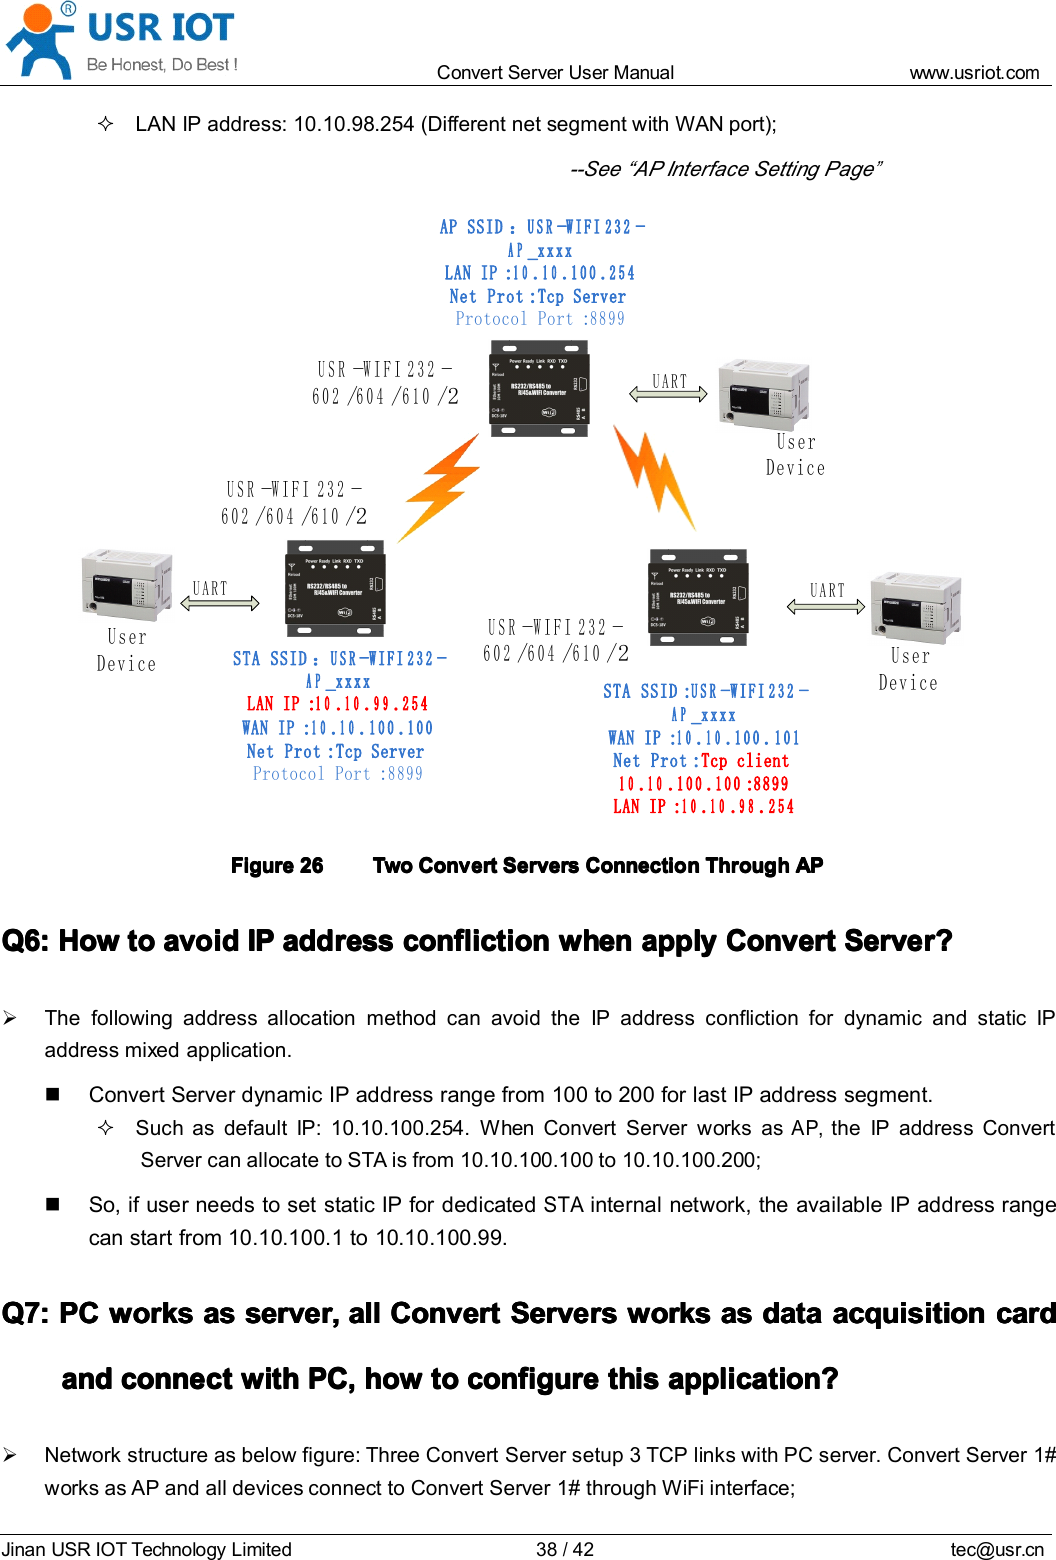 Convert Server User Manual www.usr iot.c omJinan USR IOT Technology Limited 38/42 tec@usr.cnLAN IP address: 10.10.98.254 (Different net segment with WAN port);--See “ AP Interface Setting Page”User DeviceUARTUSR-WIFI232-602/604/610/ 2UARTUARTSTA SSID：USR-WIFI232-AP_xxxxLAN IP:10.10.99.254WAN IP:10.10.100.100Net Prot:Tcp ServerProtocol Port:8899STA SSID:USR-WIFI232-AP_xxxxWAN IP:10.10.100.101Net Prot:Tcp client10.10.100.100:8899LAN IP:10.10.98.254AP SSID：USR-WIFI232-AP_xxxxLAN IP:10.10.100.254Net Prot:Tcp ServerProtocol Port:8899User DeviceUser DeviceUSR-WIFI232-602/604/610/ 2USR-WIFI232-602/604/610/ 2FigureFigureFigureFigure 26262626 TwoTwoTwoTwo ConvertConvertConvertConvert ServerServerServerServer ssss ConnectionConnectionConnectionConnection ThroughThroughThroughThrough APAPAPAPQ6:Q6:Q6:Q6: HowHowHowHow totototo avoidavoidavoidavoid IPIPIPIP addressaddressaddressaddress conflictionconflictionconflictionconfliction whenwhenwhenwhen applyapplyapplyapply ConvertConvertConvertConvert ServerServerServerServer ????The following address allocation method can avoid the IP address confliction for dynamic and static IPaddress mixed application.Convert Server dynamic IP address range from 100 to 200 for last IP address segment.Such as default IP: 10.10.100.254. When Convert Server works asAP,the IP address ConvertServer can allocate to STA is from 10.10.100.100 to 10.10.100.200;So, if user needs to set static IP for dedicatedSTAinternal network, the available IP address rangecan start from 10.10.100.1 to 10.10.100.99.Q7:Q7:Q7:Q7: PCPCPCPC worksworksworksworks asasasas server,server,server,server, allallallall ConvertConvertConvertConvert ServerServerServerServer ssss worksworksworksworks asasasas datadatadatadata acquisitionacquisitionacquisitionacquisition cardcardcardcardandandandand connectconnectconnectconnect withwithwithwith PC,PC,PC,PC, howhowhowhow totototo configureconfigureconfigureconfigure thisthisthisthis application?application?application?application?Network structure as below figure: Three Convert Server setup 3 TCP links with PC server. Convert Server 1#works as AP and all devices connect to Convert Server 1# through WiFi interface;